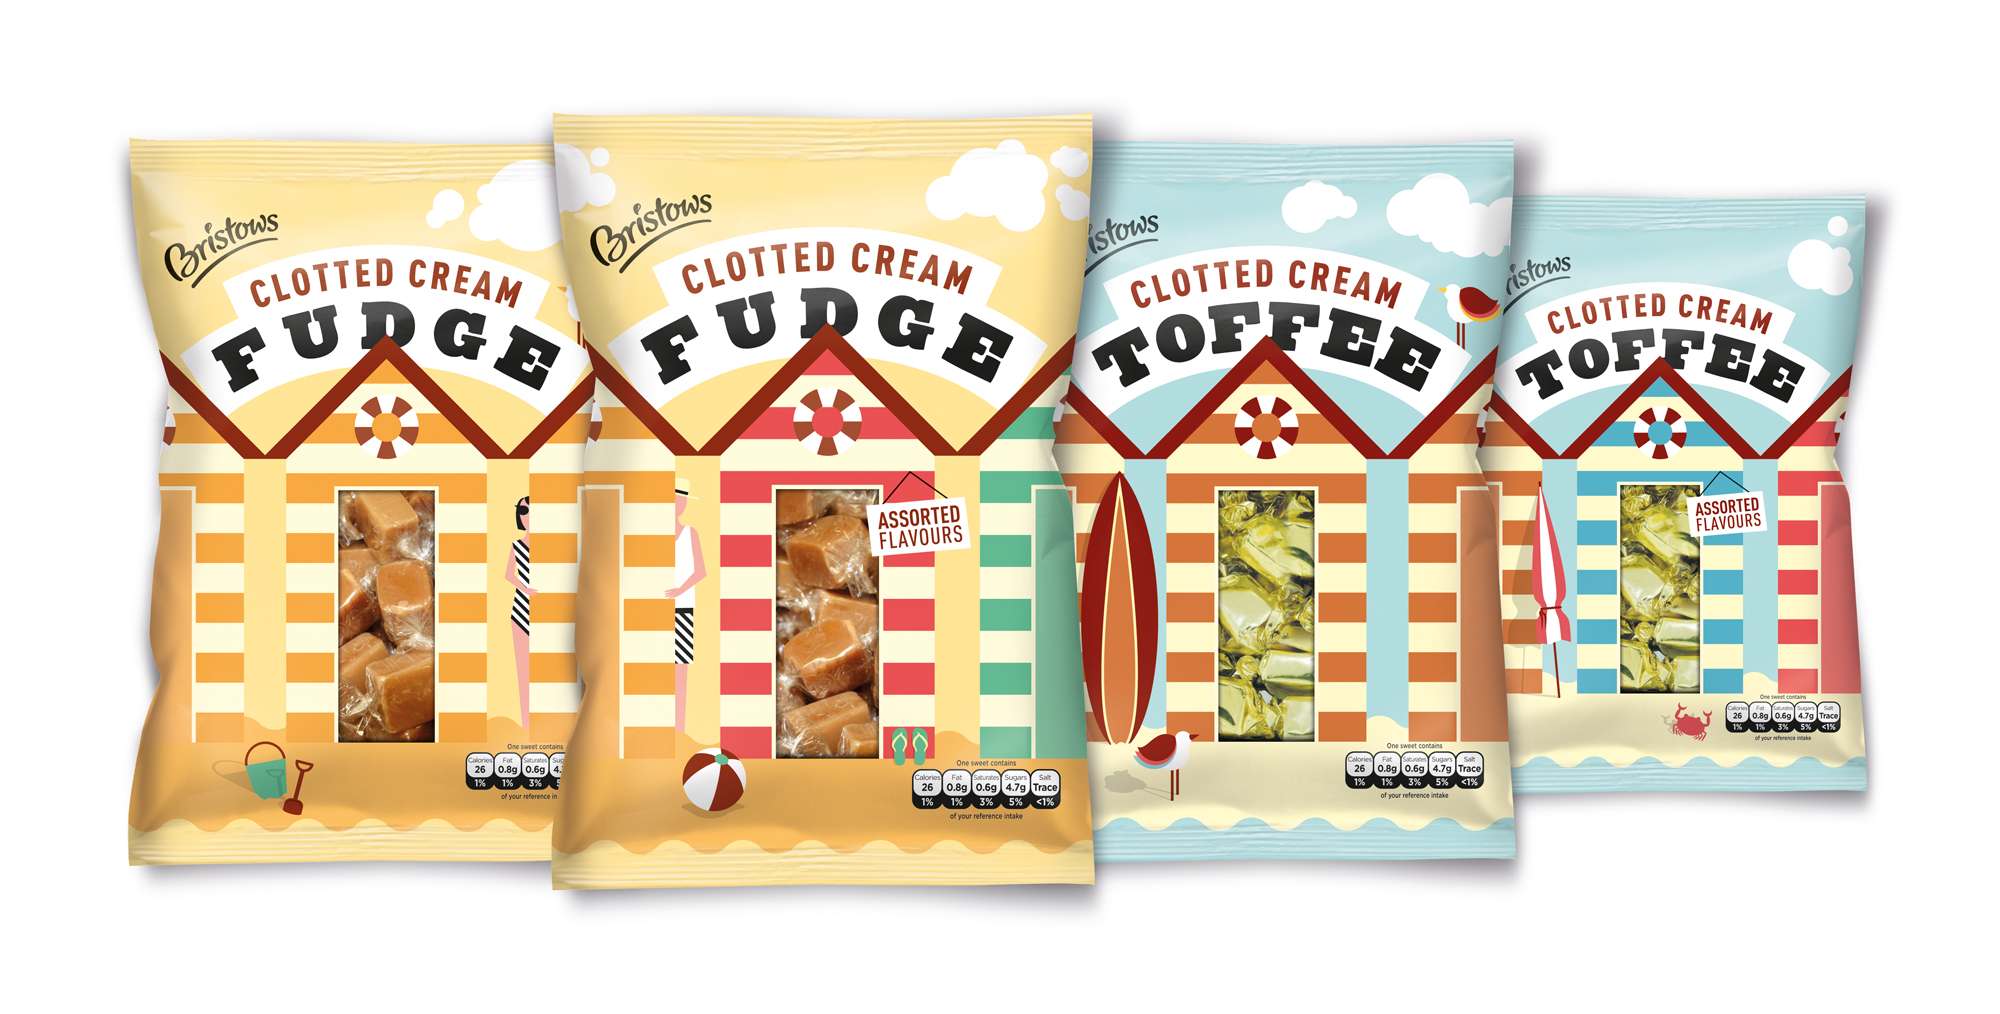 Photo: new Bristows Toffee and Fudge sweets in the packs designed by Aesop